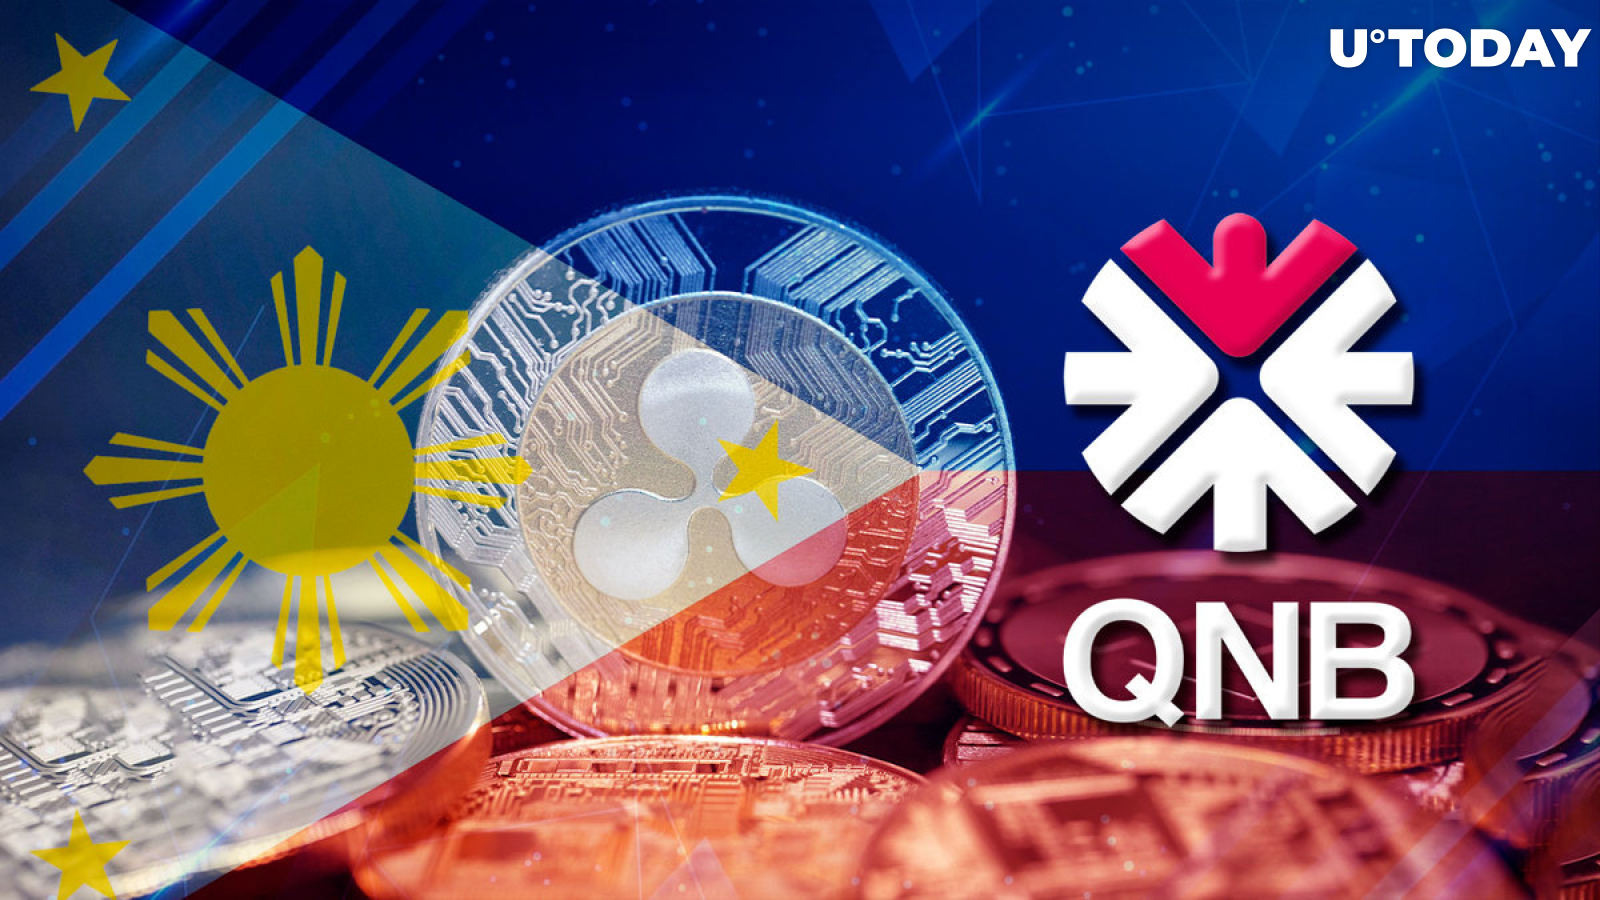 Ripple Expands Its Remittance Technology to Philippines via QNB in First-of-Its-Kind Move